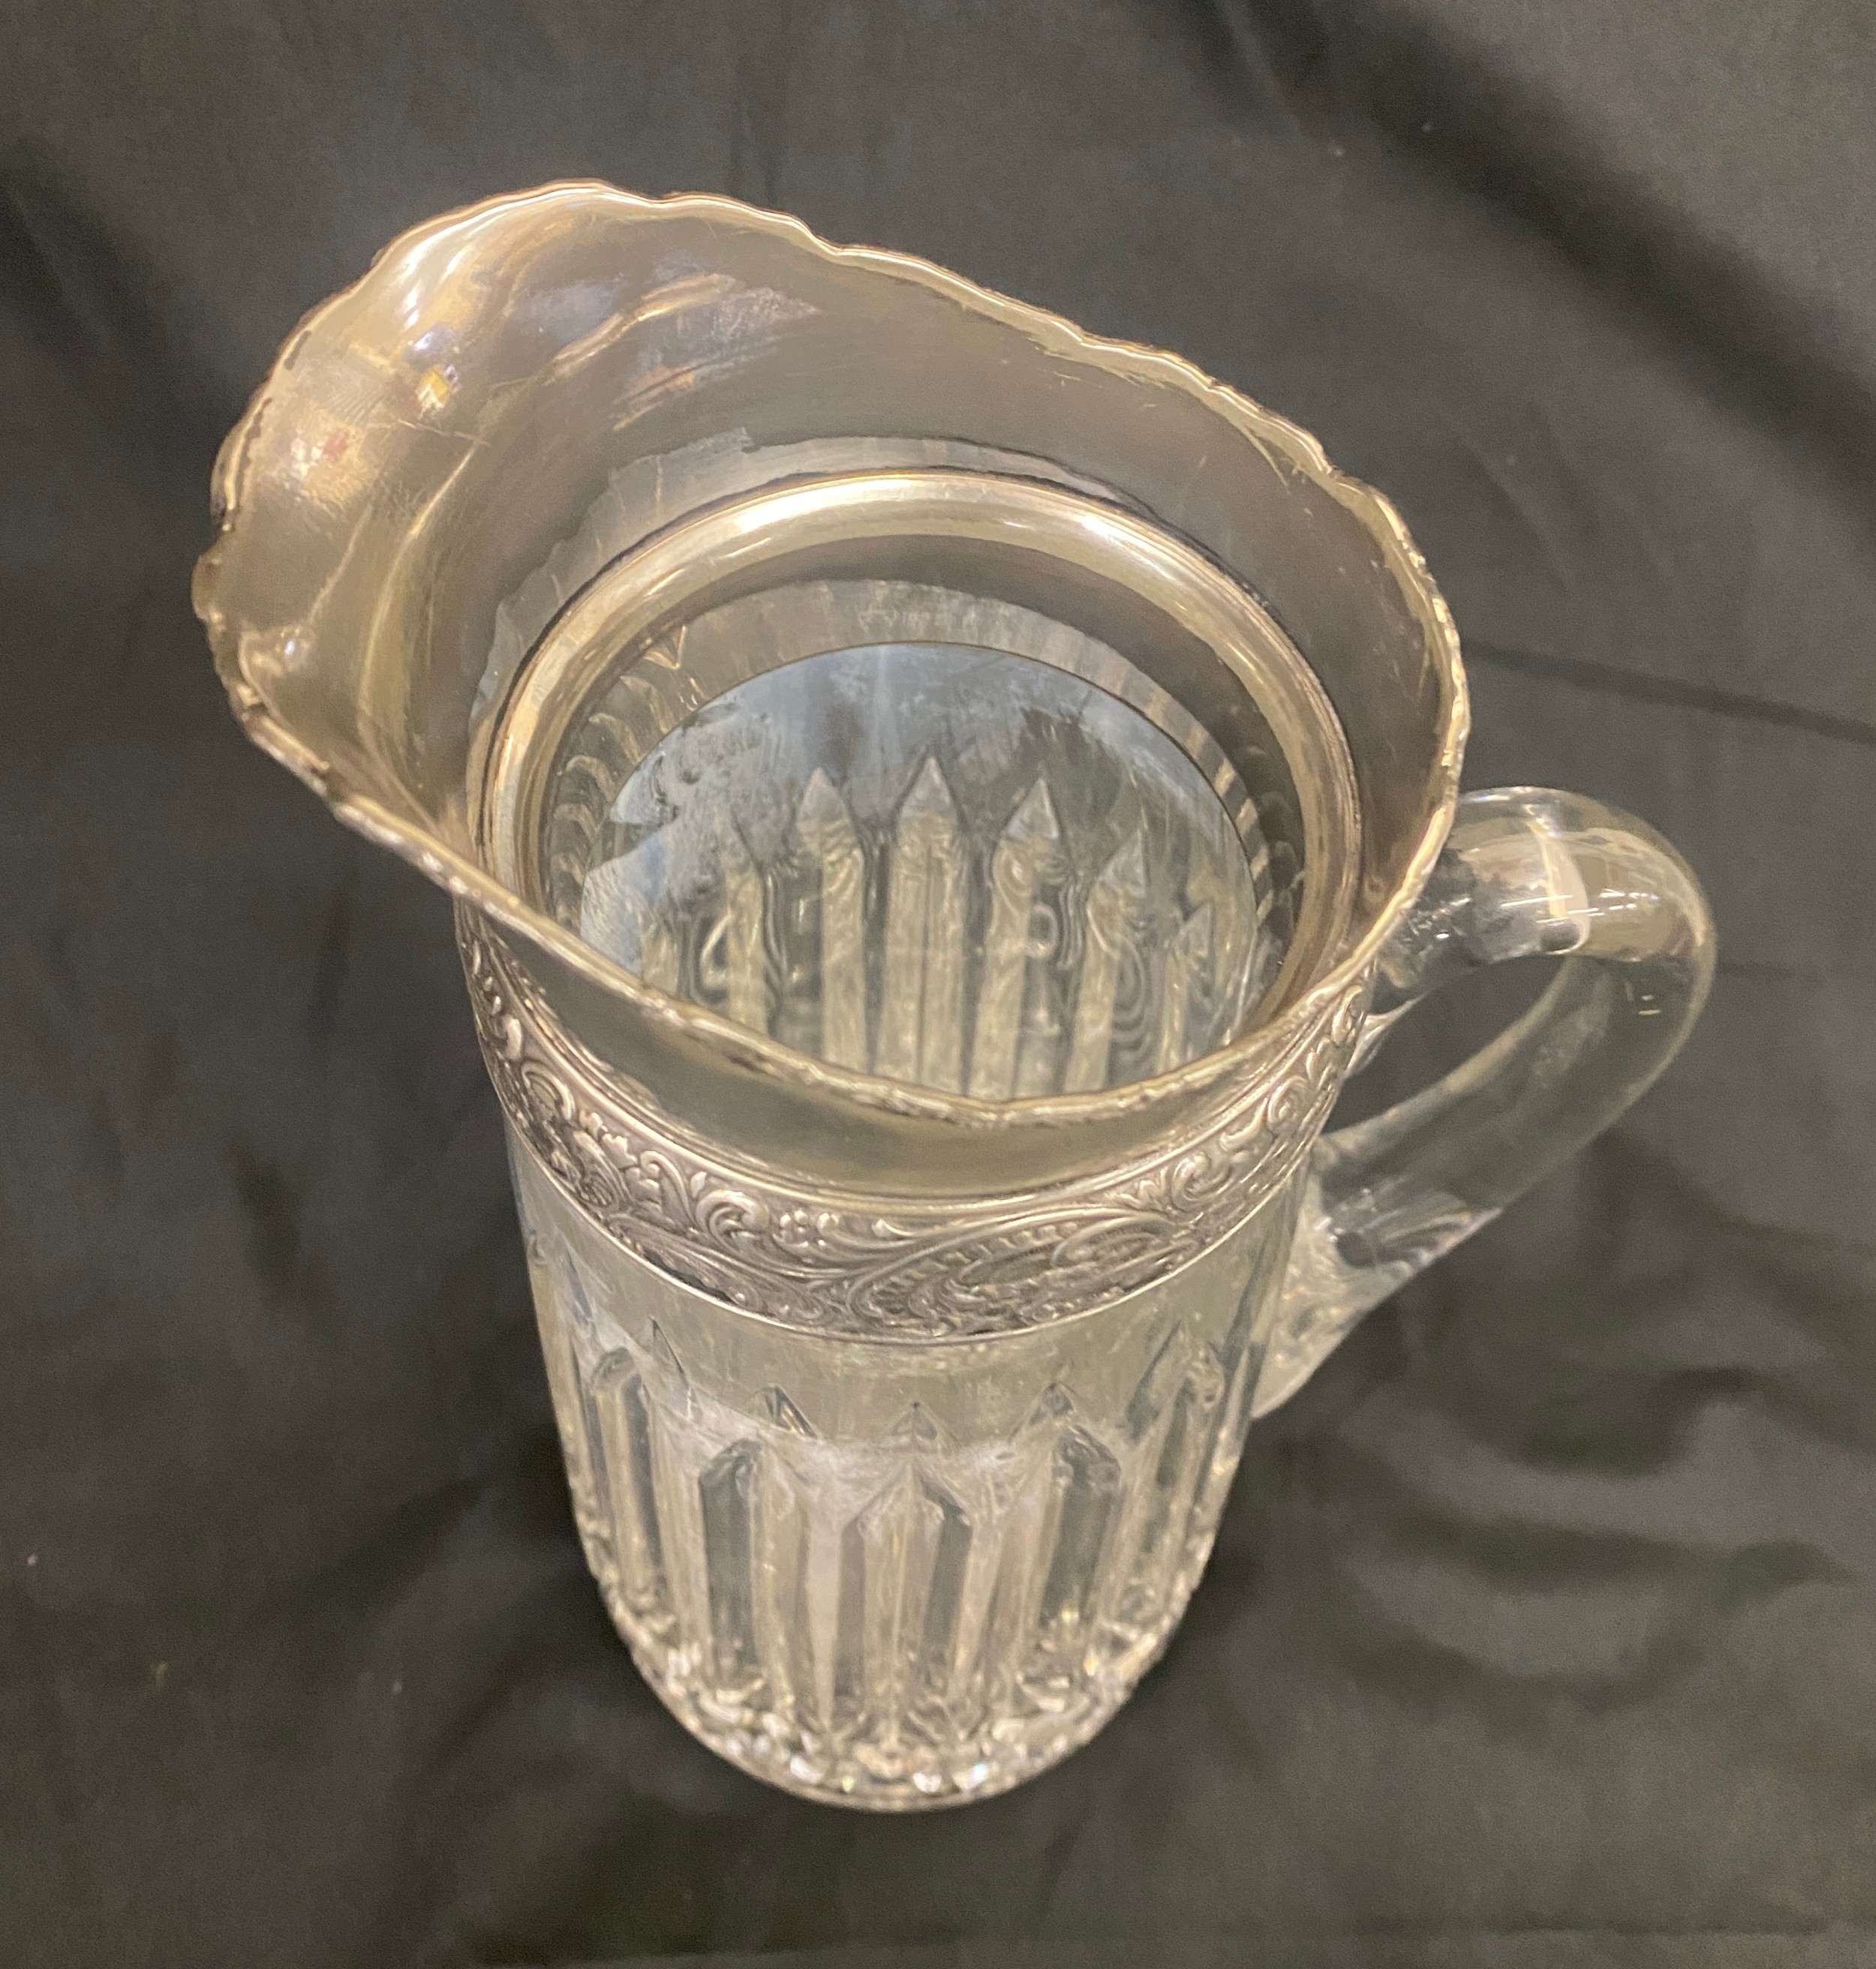 A lead crystal jug with silver plated lid measures approx 11.5 inches tall - Image 2 of 4